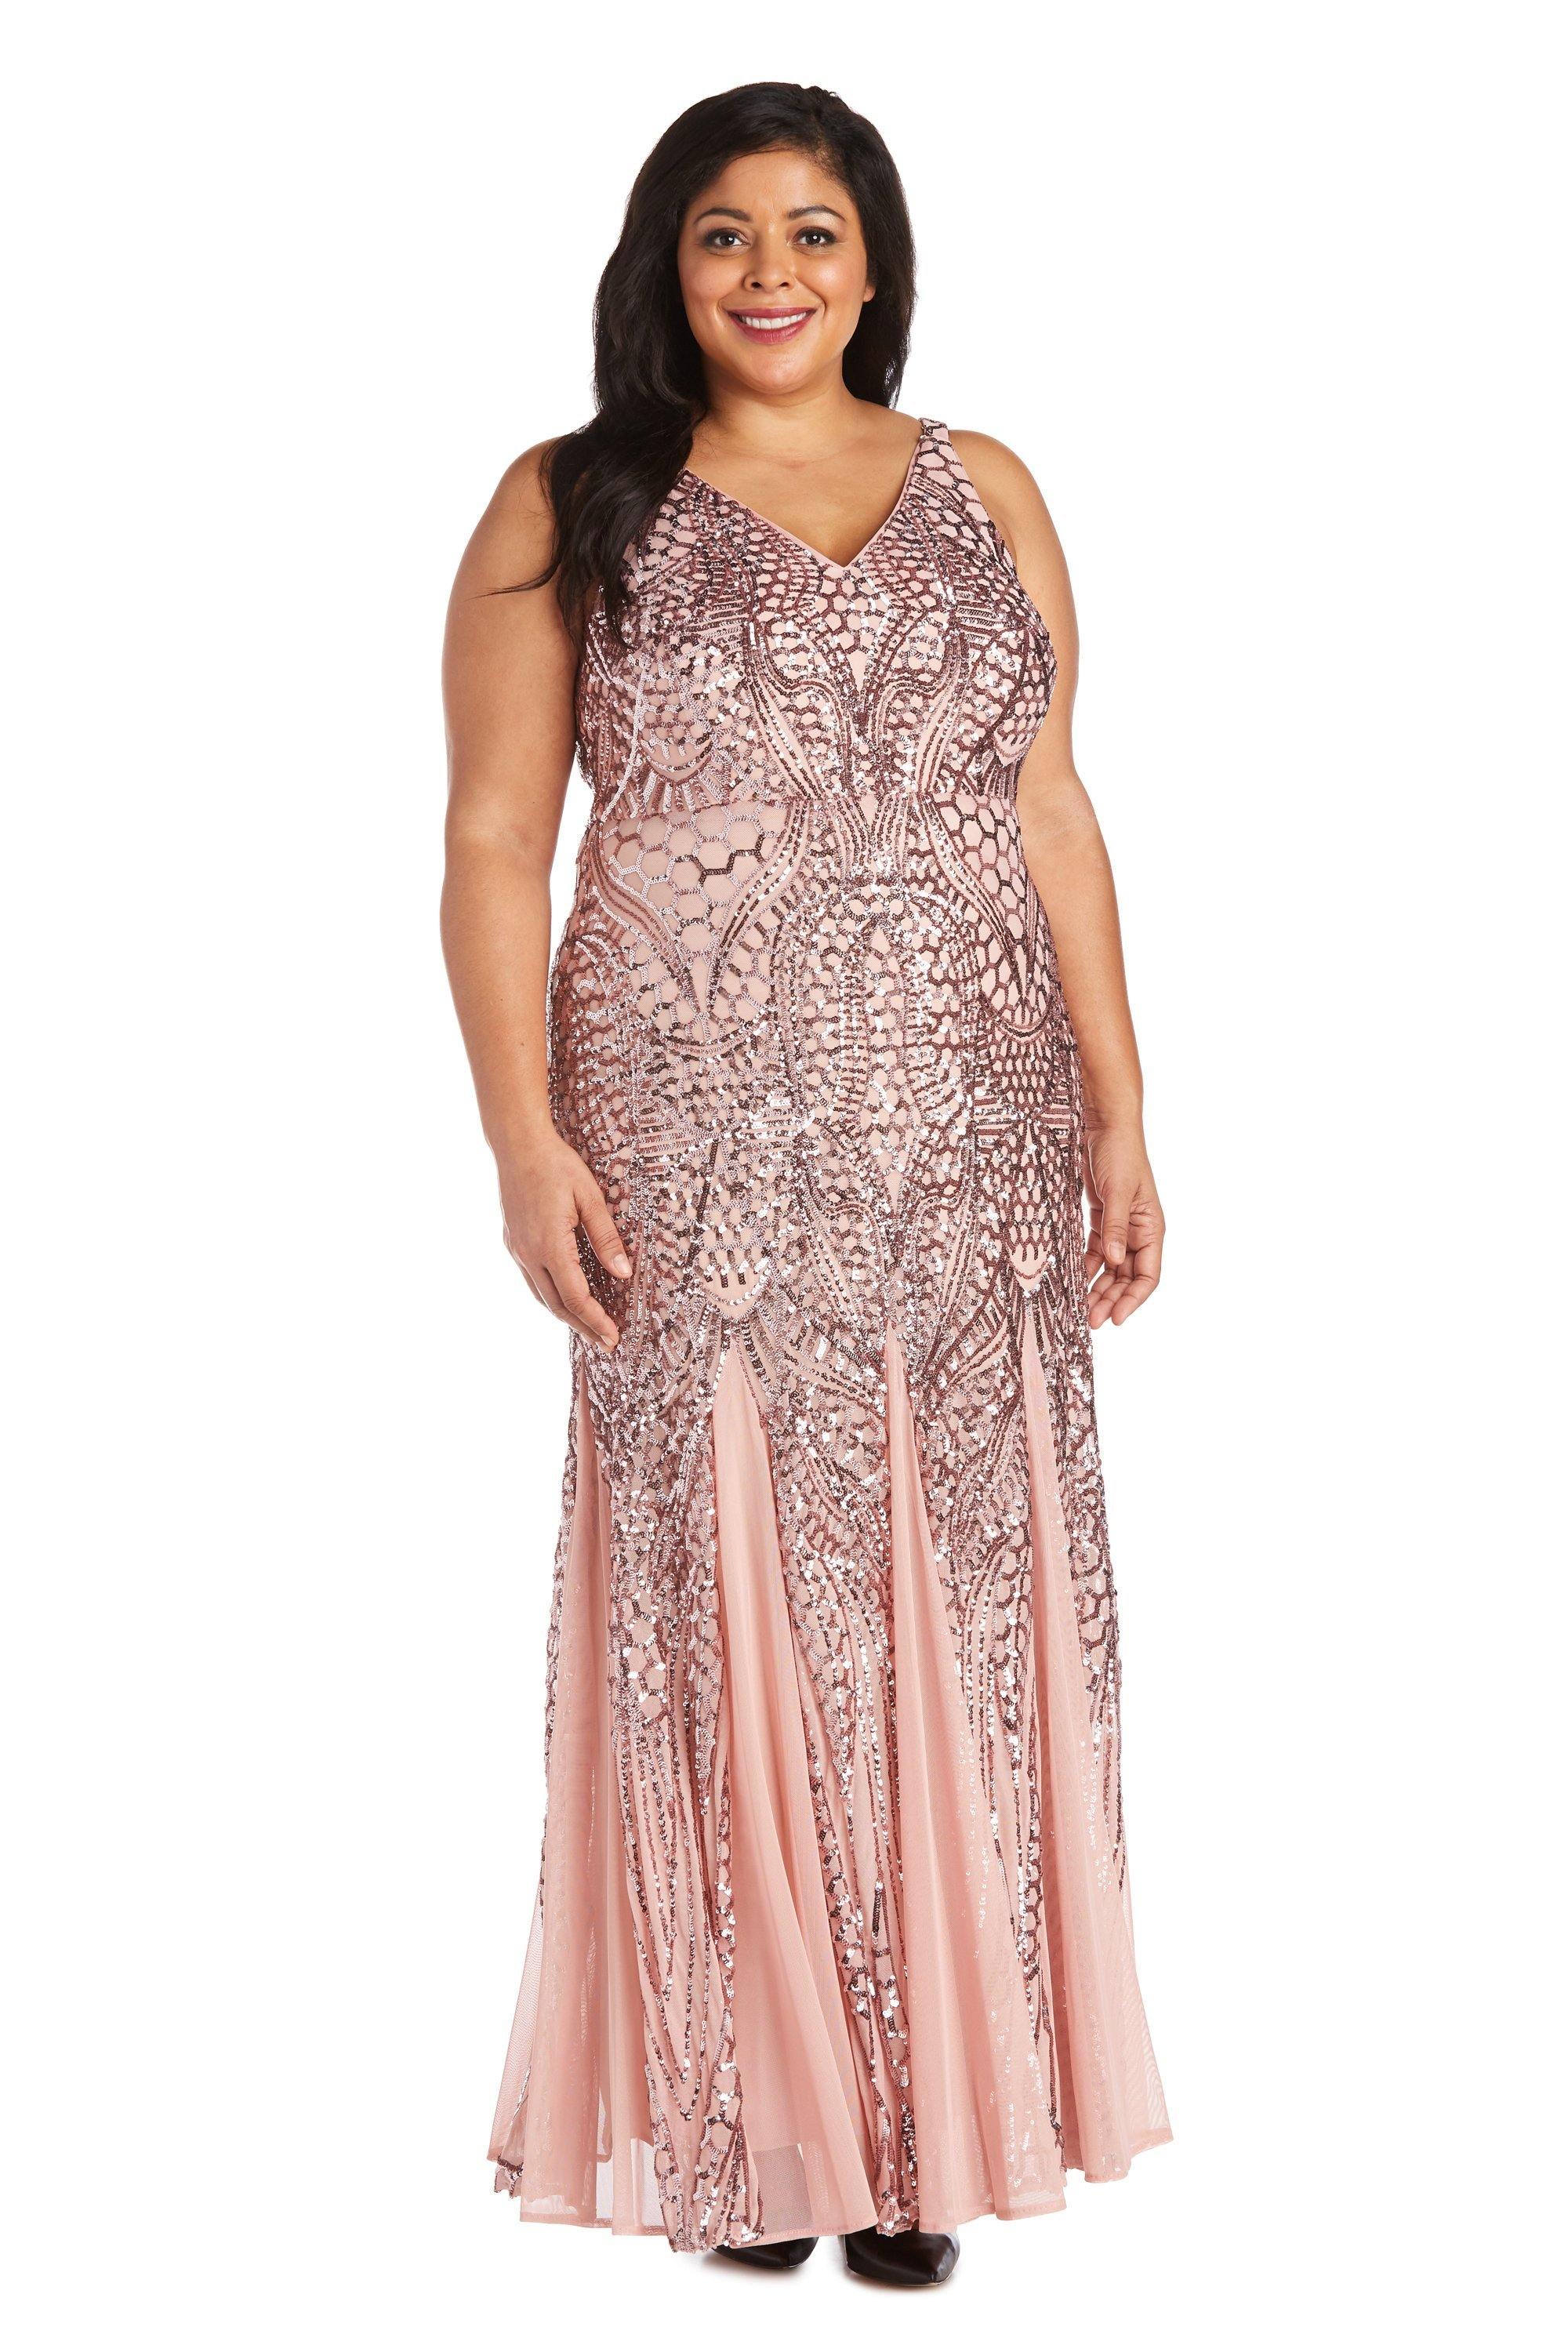 Plum Nightway Long Plus Size Beaded Formal Gown 21685W for $114.99, – The  Dress Outlet